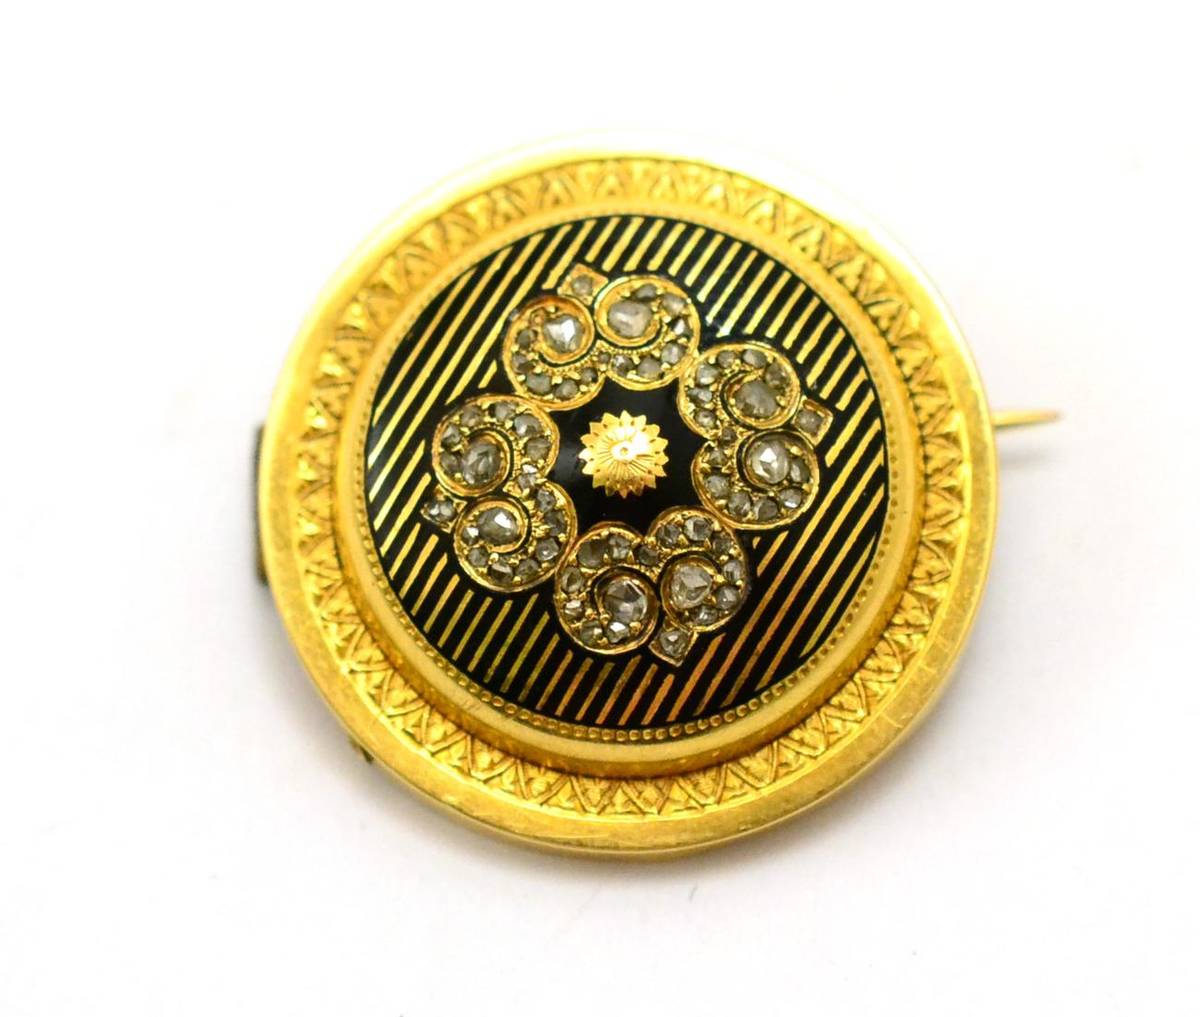 Lot 347 - # A Victorian brooch, the circular form with rose cut diamond quatrefoil motif centrally, and black